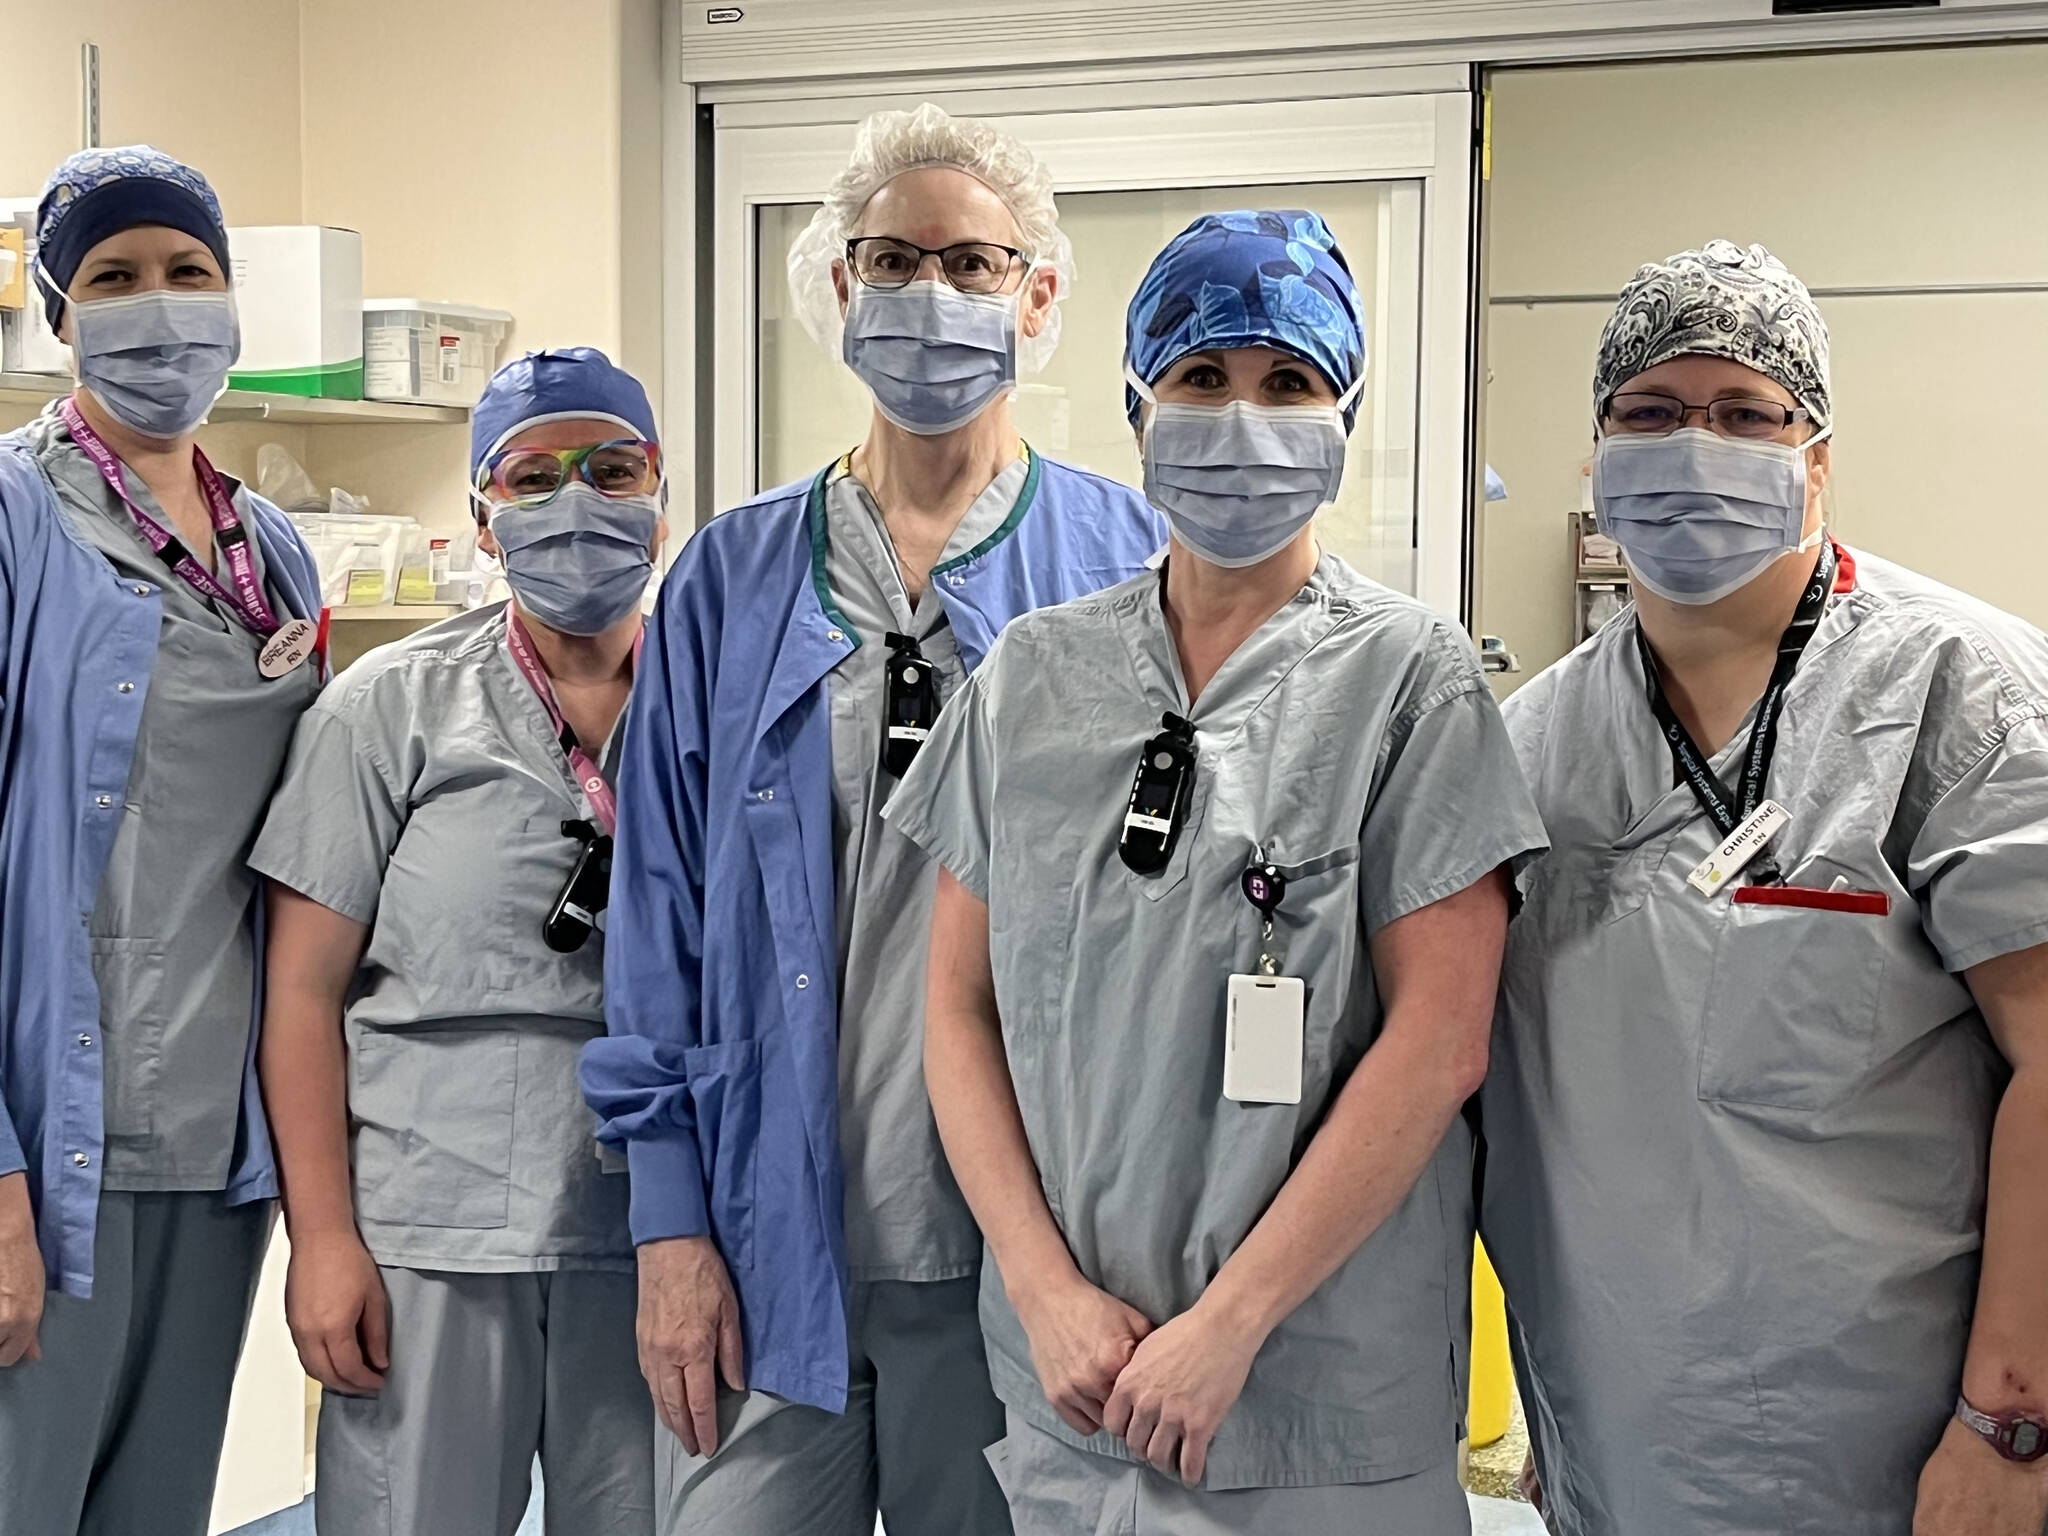 The Operating Room team. (Submitted)